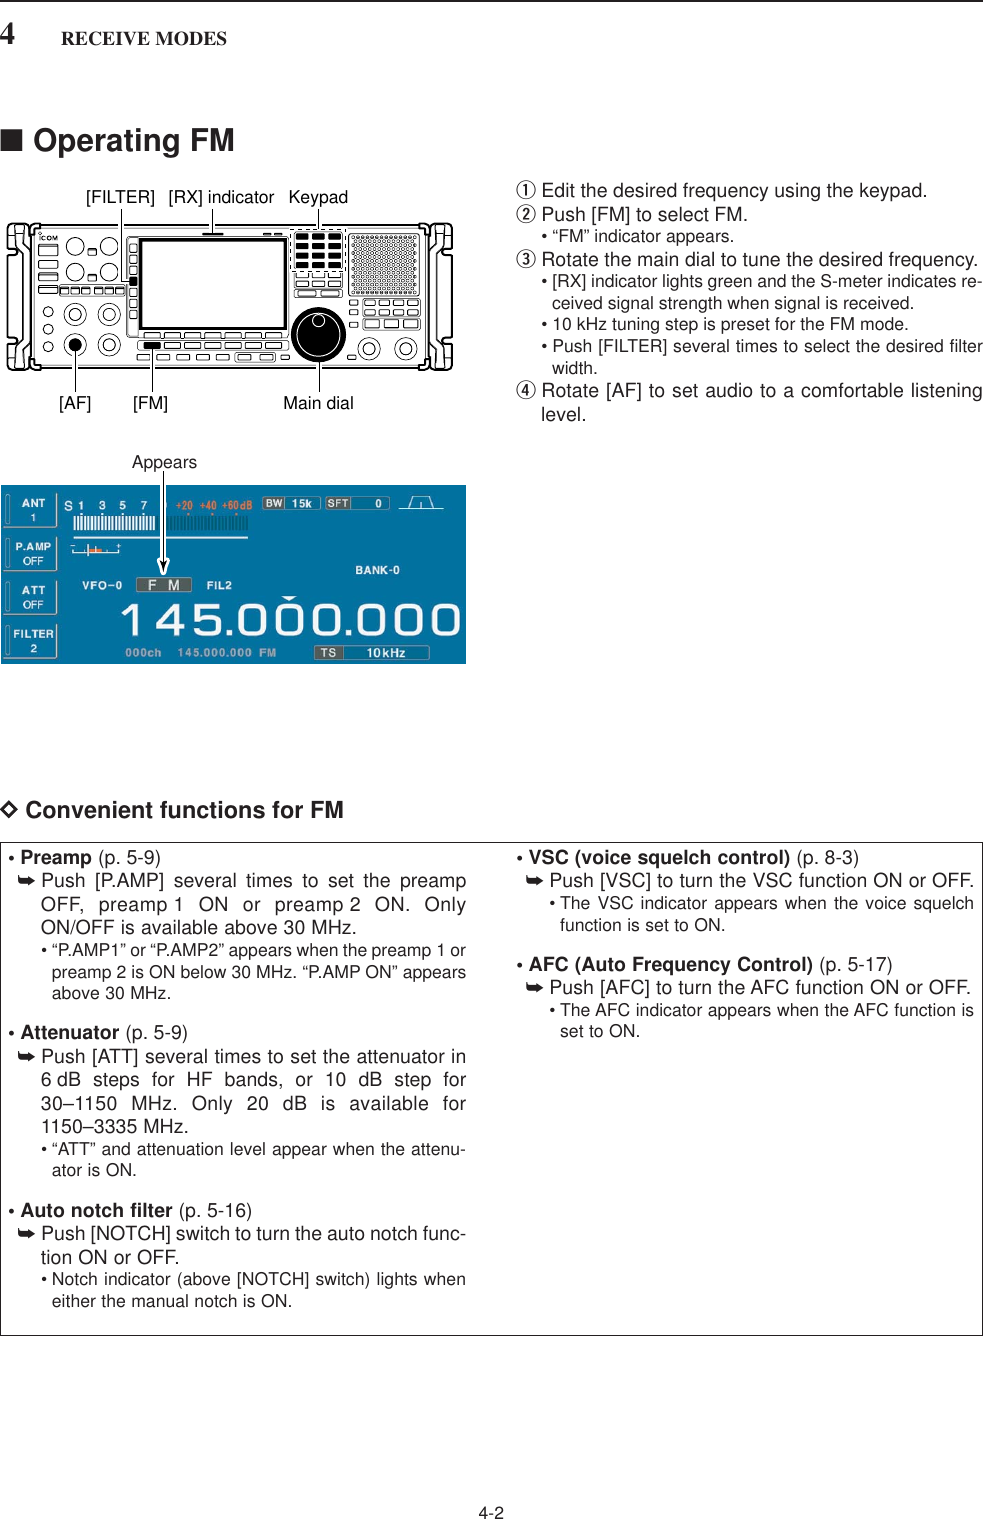 4-24RECEIVE MODES■Operating FMqEdit the desired frequency using the keypad.wPush [FM] to select FM.• “FM” indicator appears.eRotate the main dial to tune the desired frequency.• [RX] indicator lights green and the S-meter indicates re-ceived signal strength when signal is received.• 10 kHz tuning step is preset for the FM mode.• Push [FILTER] several times to select the desired filterwidth.rRotate [AF] to set audio to a comfortable listeninglevel.DConvenient functions for FMAppearsKeypad[RX] indicator[FILTER][AF] [FM] Main dial• Preamp (p. 5-9)➥Push [P.AMP] several times to set the preampOFF, preamp 1 ON or preamp 2 ON. OnlyON/OFF is available above 30 MHz.• “P.AMP1” or “P.AMP2” appears when the preamp 1 orpreamp 2 is ON below 30 MHz. “P.AMP ON” appearsabove 30 MHz.• Attenuator (p. 5-9)➥Push [ATT] several times to set the attenuator in6 dB steps for HF bands, or 10 dB step for30–1150 MHz. Only 20 dB is available for1150–3335 MHz.• “ATT” and attenuation level appear when the attenu-ator is ON.• Auto notch filter (p. 5-16)➥Push [NOTCH] switch to turn the auto notch func-tion ON or OFF.• Notch indicator (above [NOTCH] switch) lights wheneither the manual notch is ON.• VSC (voice squelch control) (p. 8-3)➥Push [VSC] to turn the VSC function ON or OFF.• The VSC indicator appears when the voice squelchfunction is set to ON.• AFC (Auto Frequency Control) (p. 5-17)➥Push [AFC] to turn the AFC function ON or OFF.• The AFC indicator appears when the AFC function isset to ON.